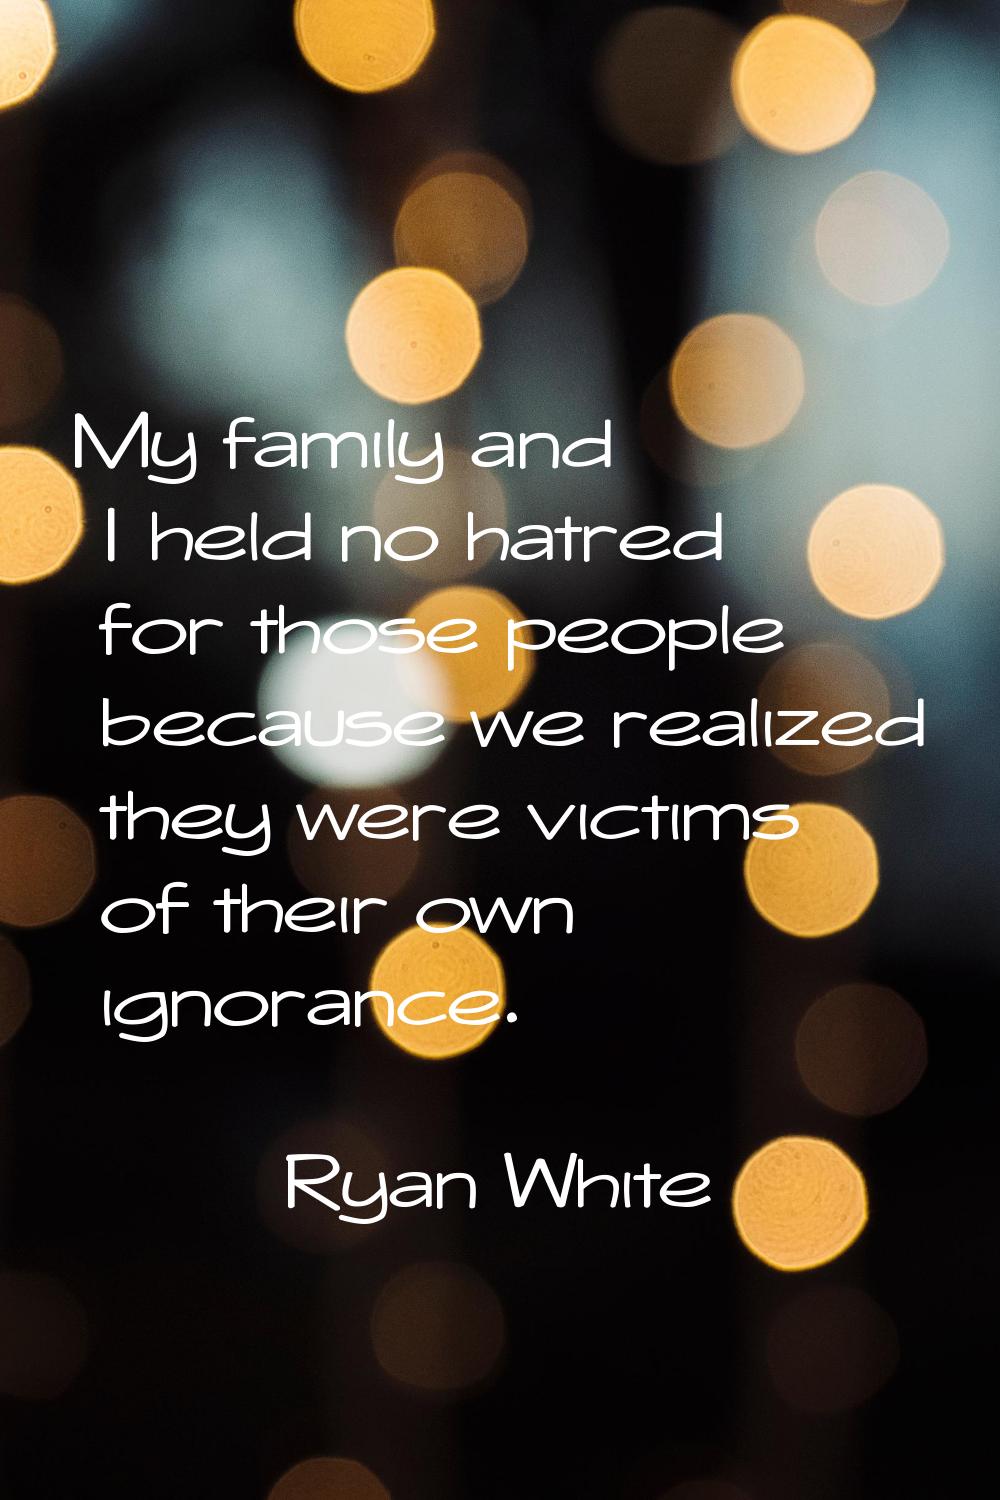 My family and I held no hatred for those people because we realized they were victims of their own 